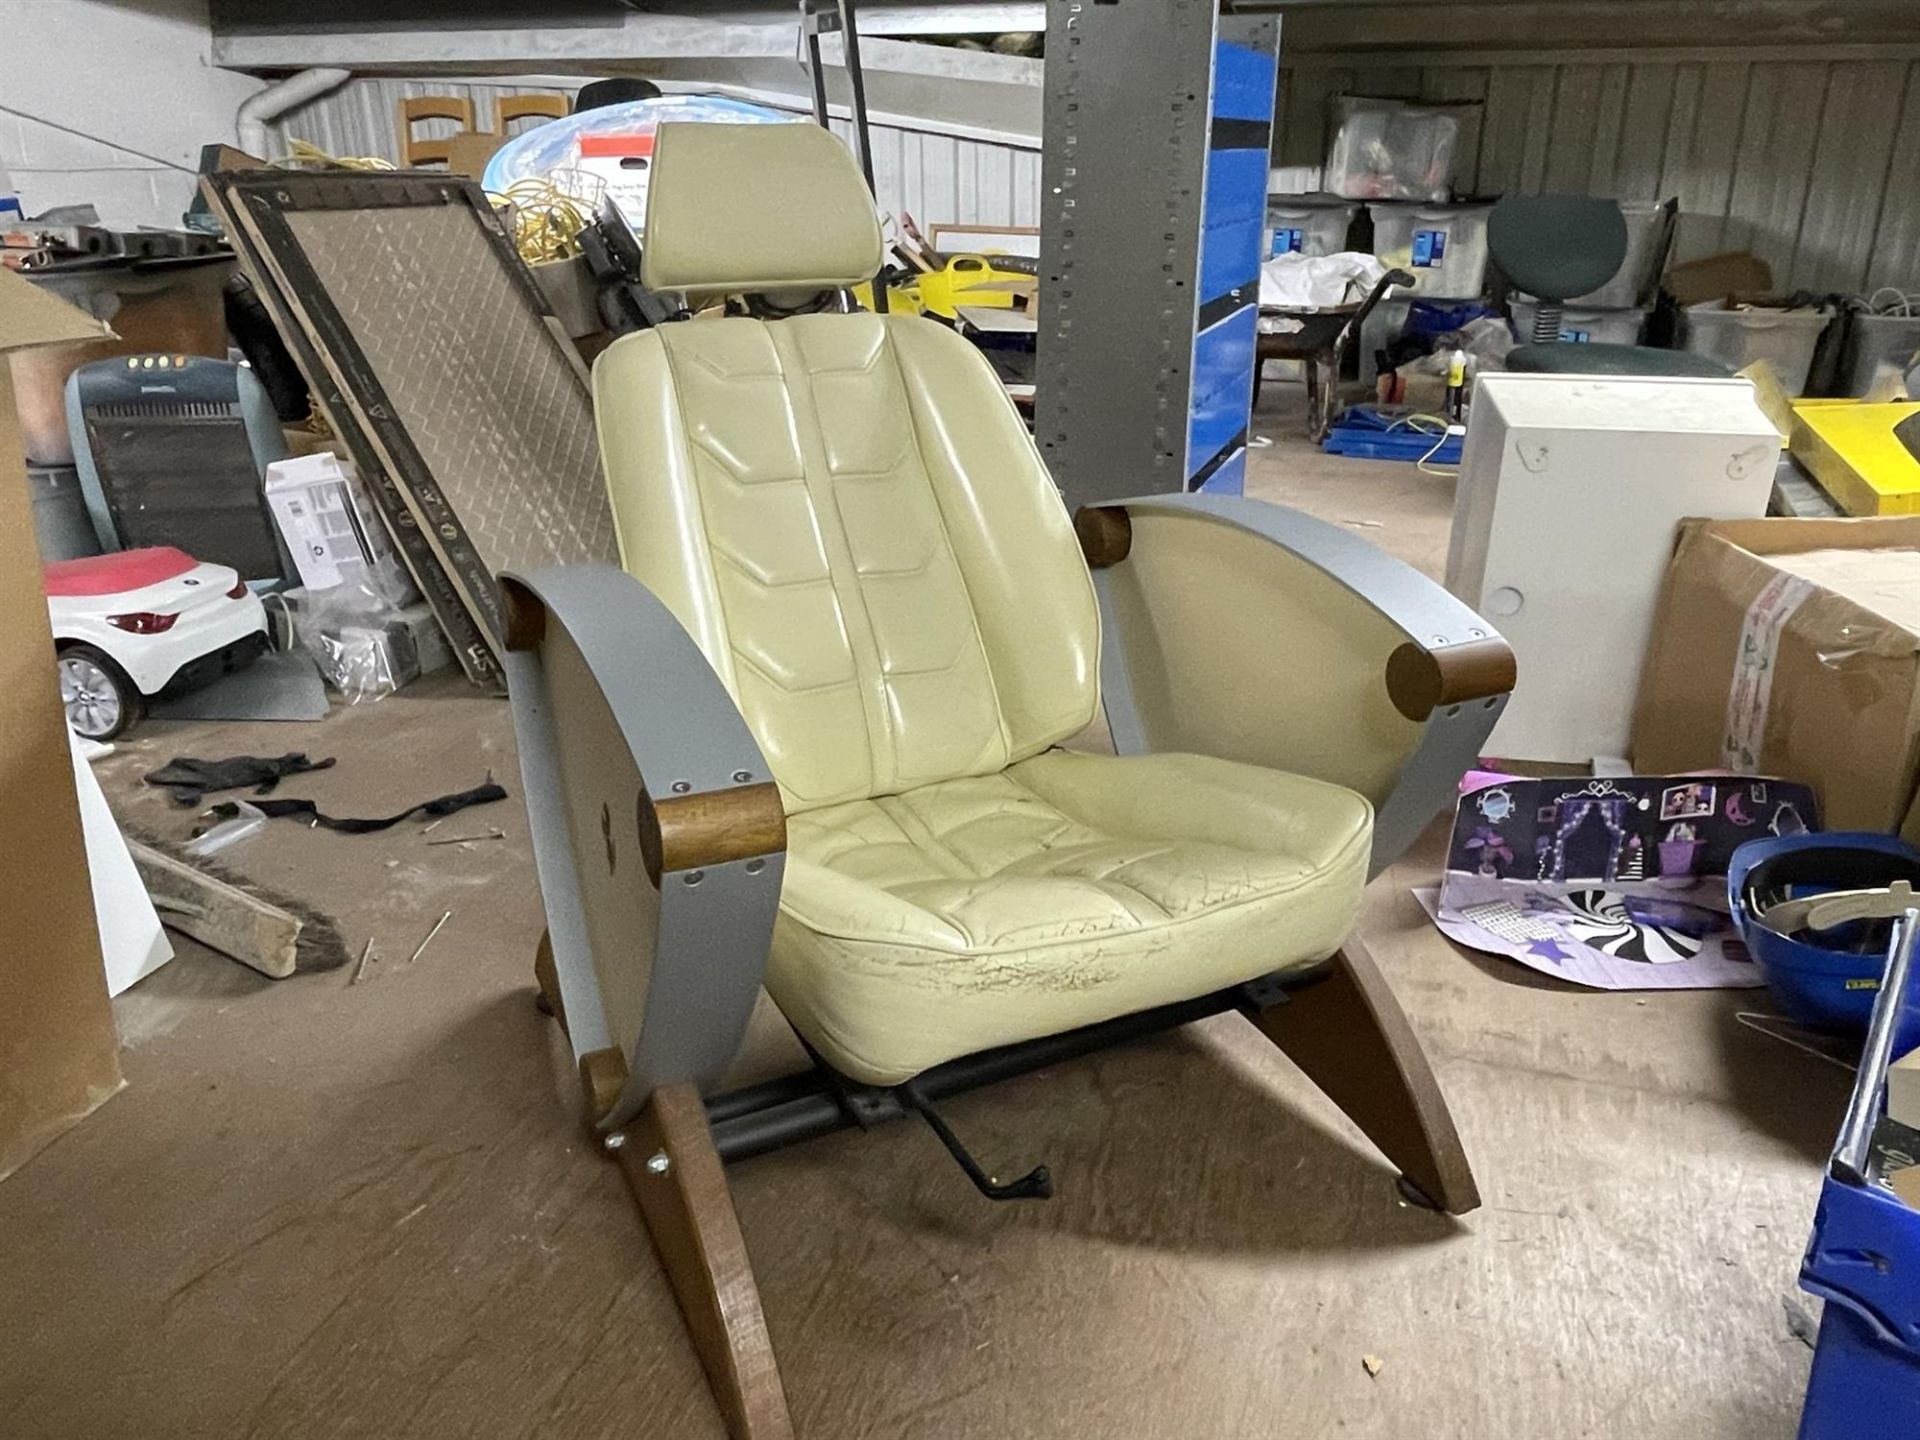 Pair of Ferrari 308 Crema Leather Seats on Substantial Bases - Image 4 of 10